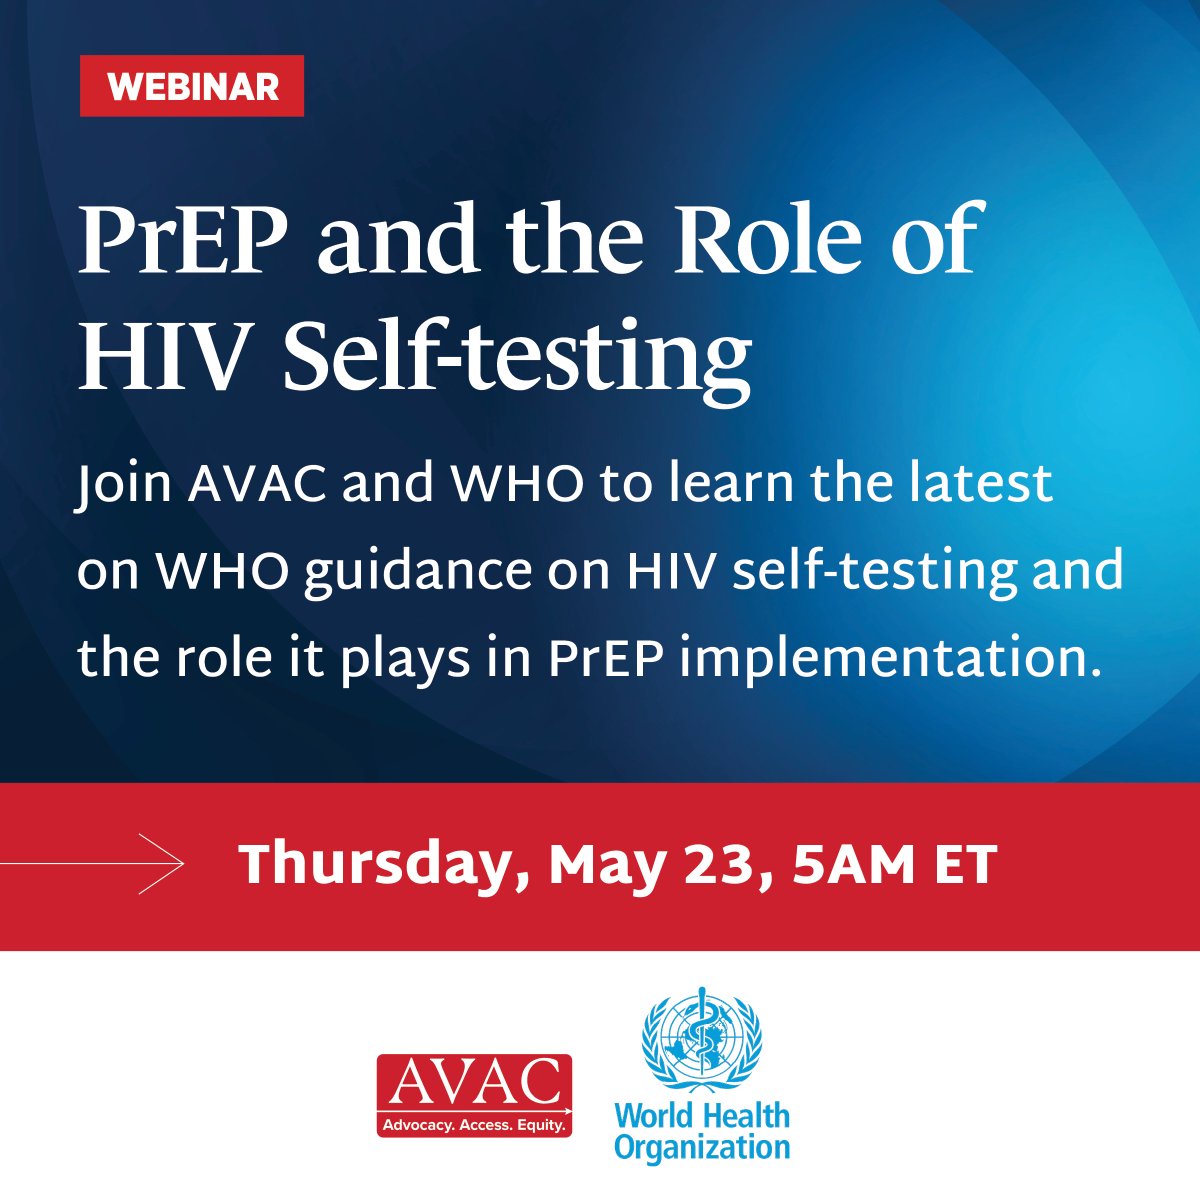 JUST ANNOUNCED! 🗓️ Join AVAC and @WHO on Thursday, May 23 at 5AM ET/3PM EAT to learn and discuss WHO's guidance on #HIV self-testing (#HIVST) and what role it plays in #PrEP access and implementation. Register and explore more here 📌 avac.org/event/prep-and…